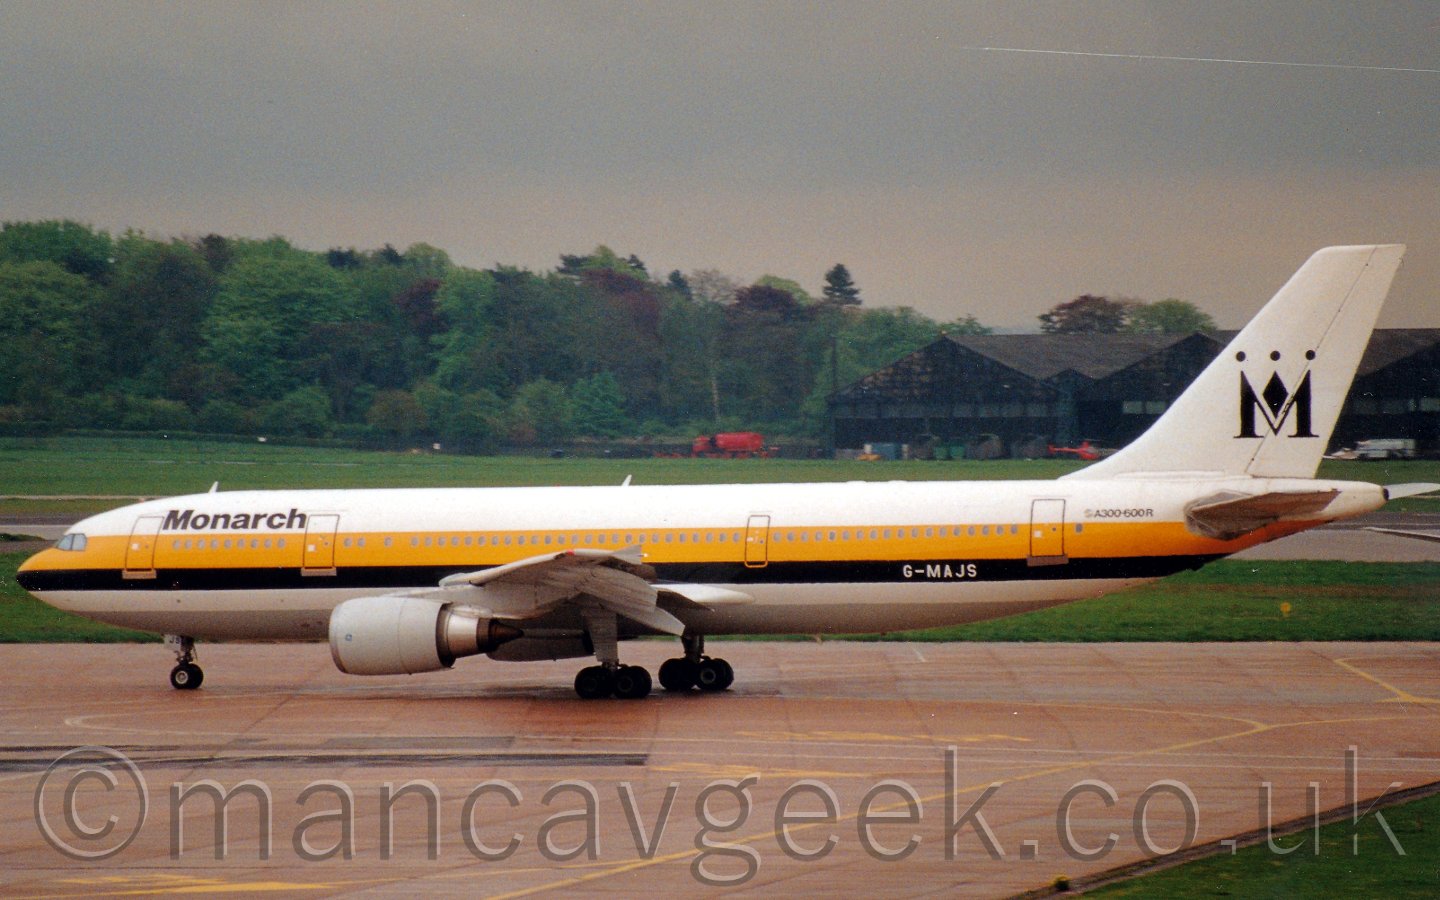 G-MAJS, Airbus A300B4-605R, Monarch Airlines, taxiing out to Runway 24 at Manchester Airport, some time in the 1990s.